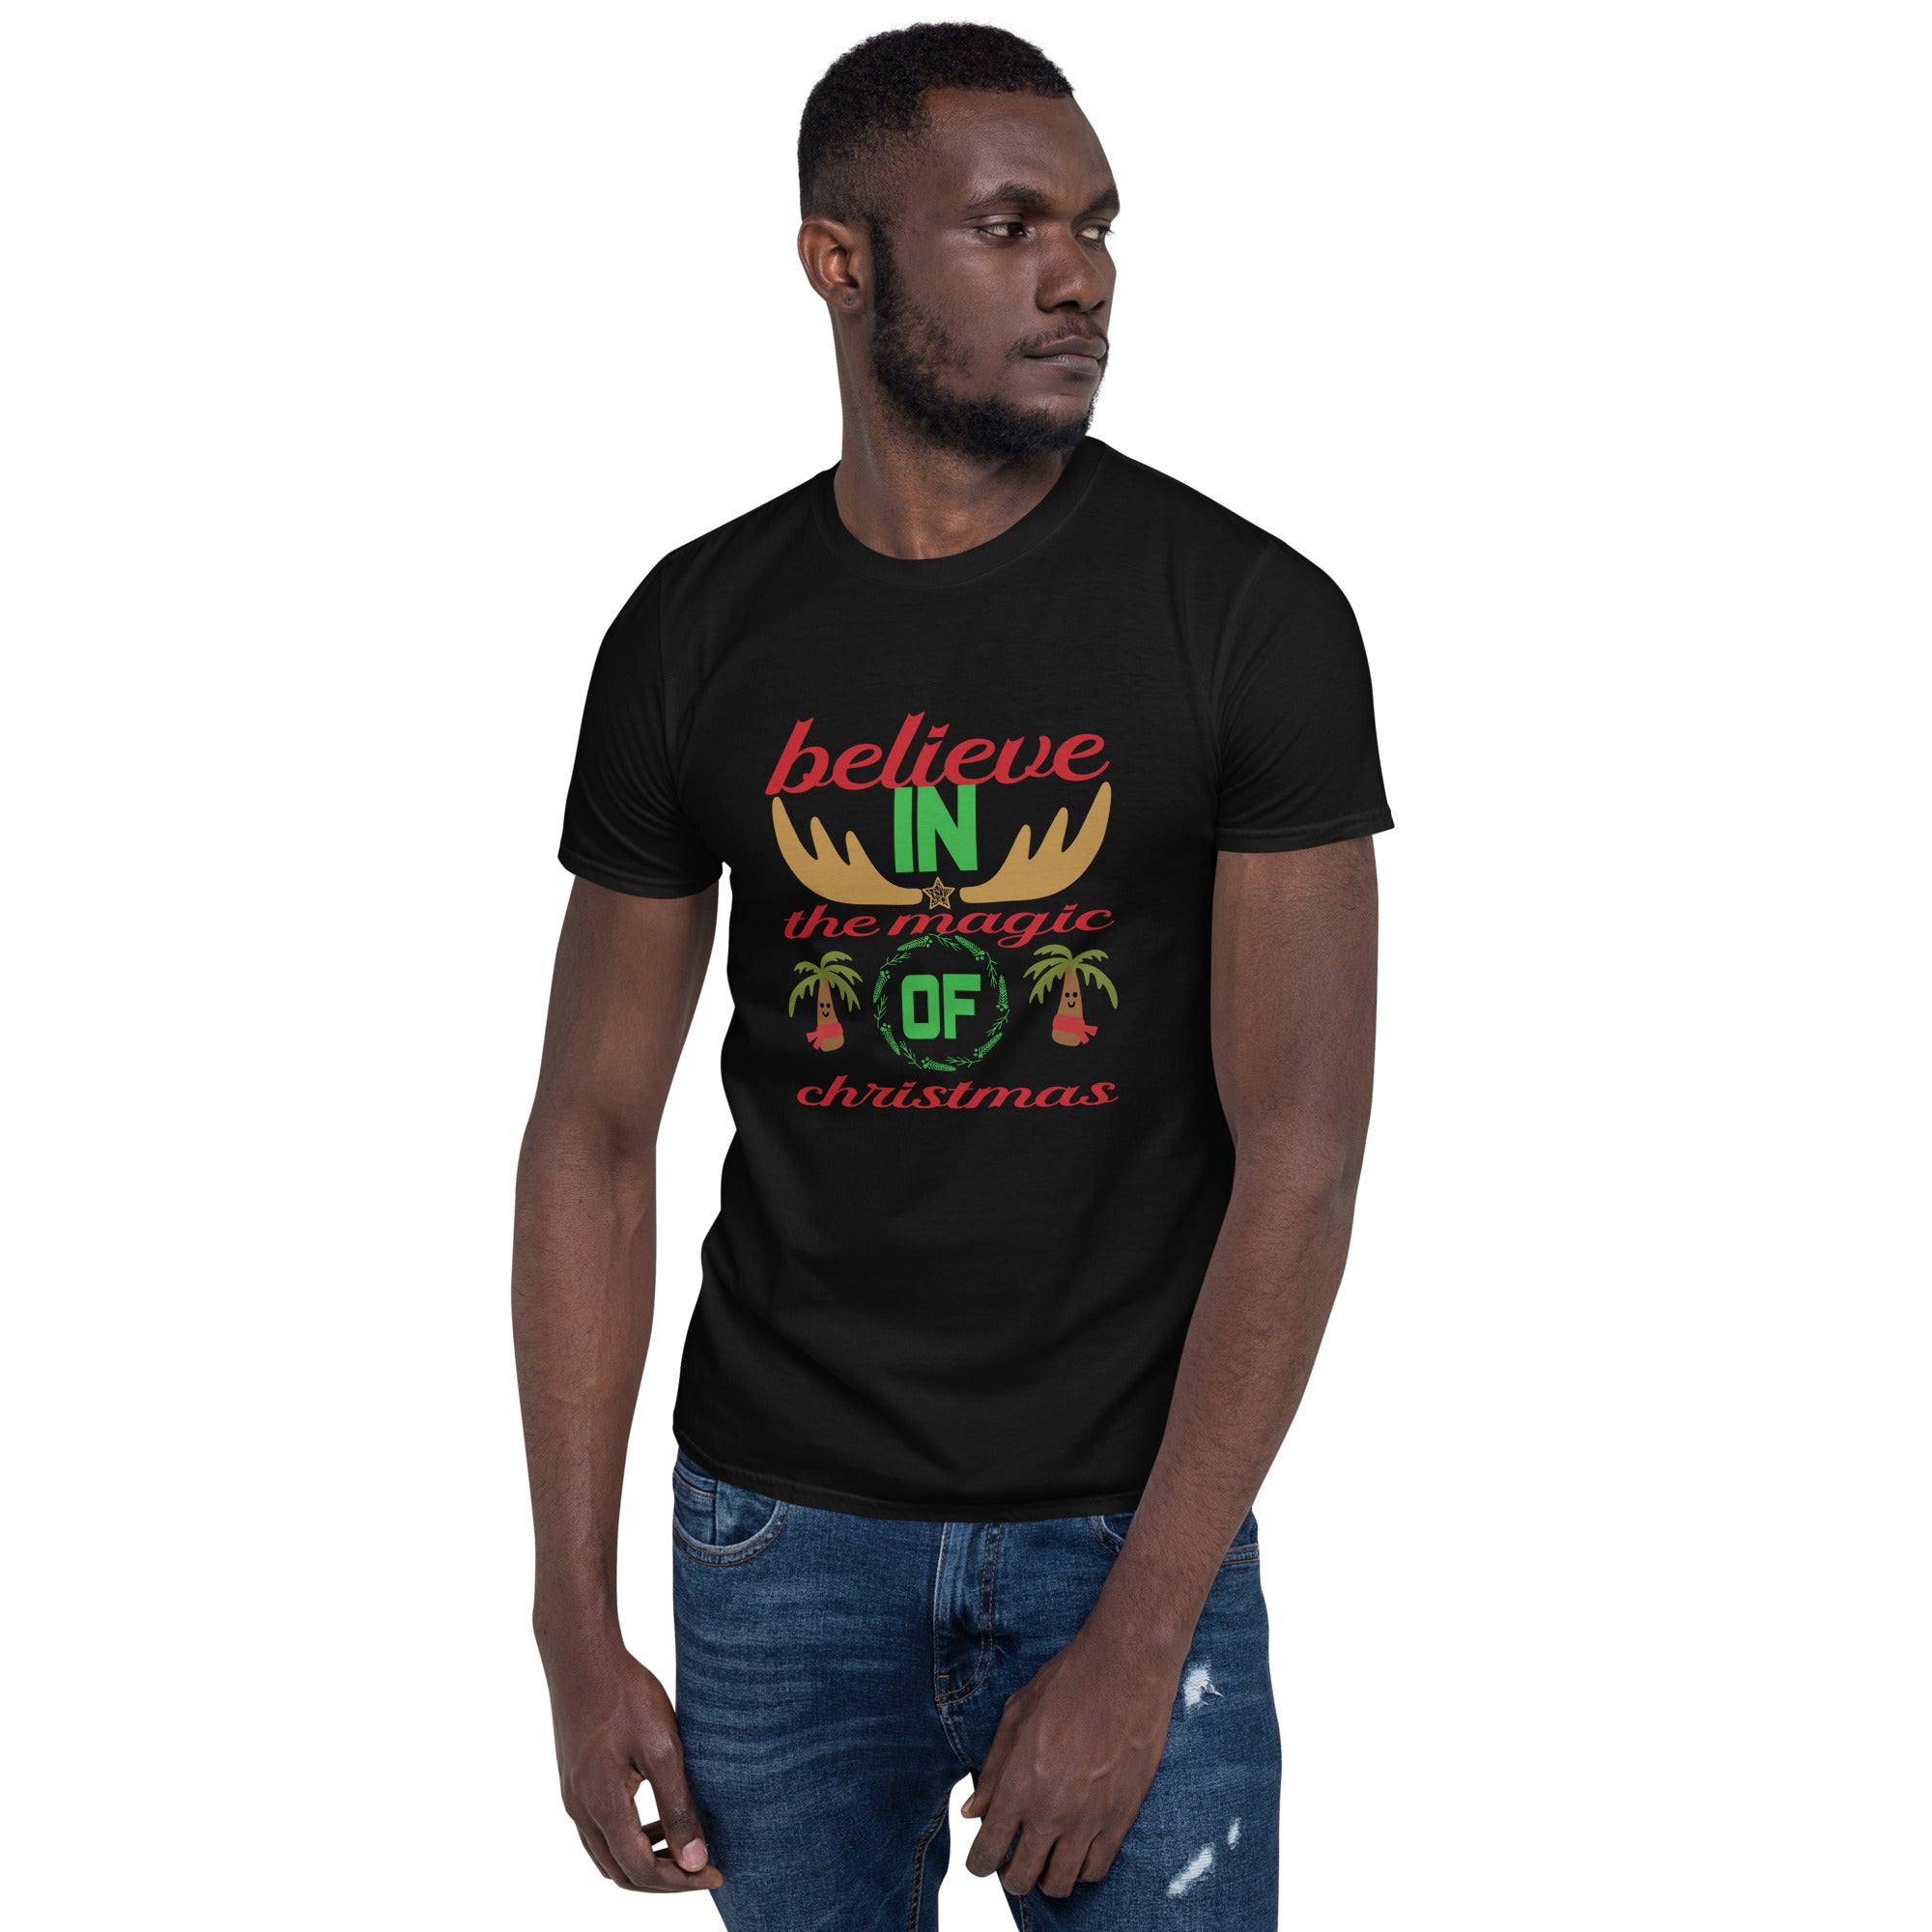 Believe In The Magic of Christmas - Short-Sleeve Unisex T-Shirt